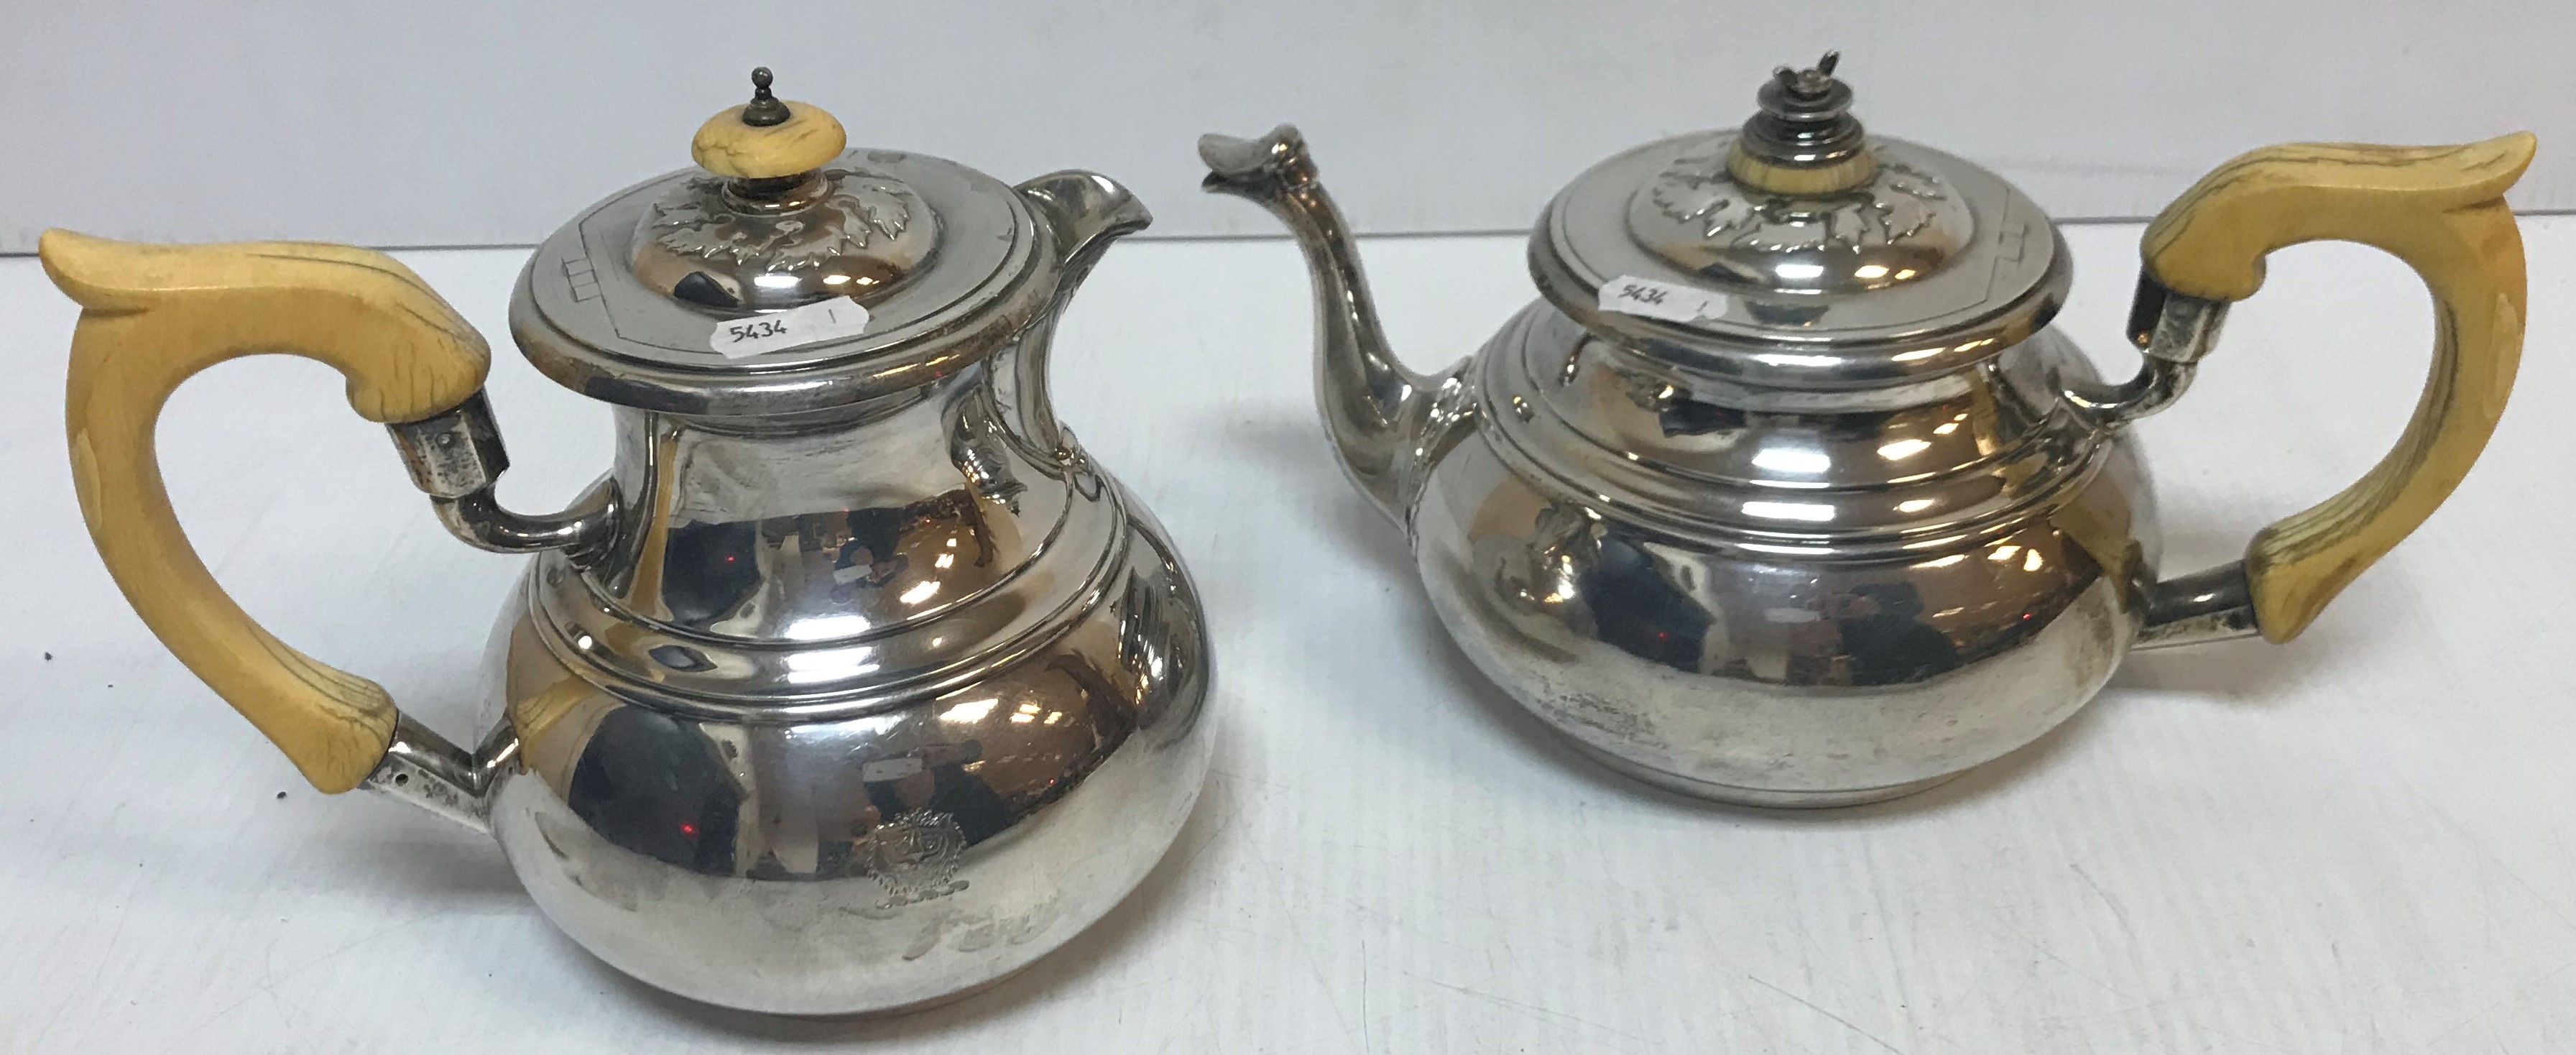 A George V silver teapot of bellied form with stylised acanthus decoration to lid and spout with